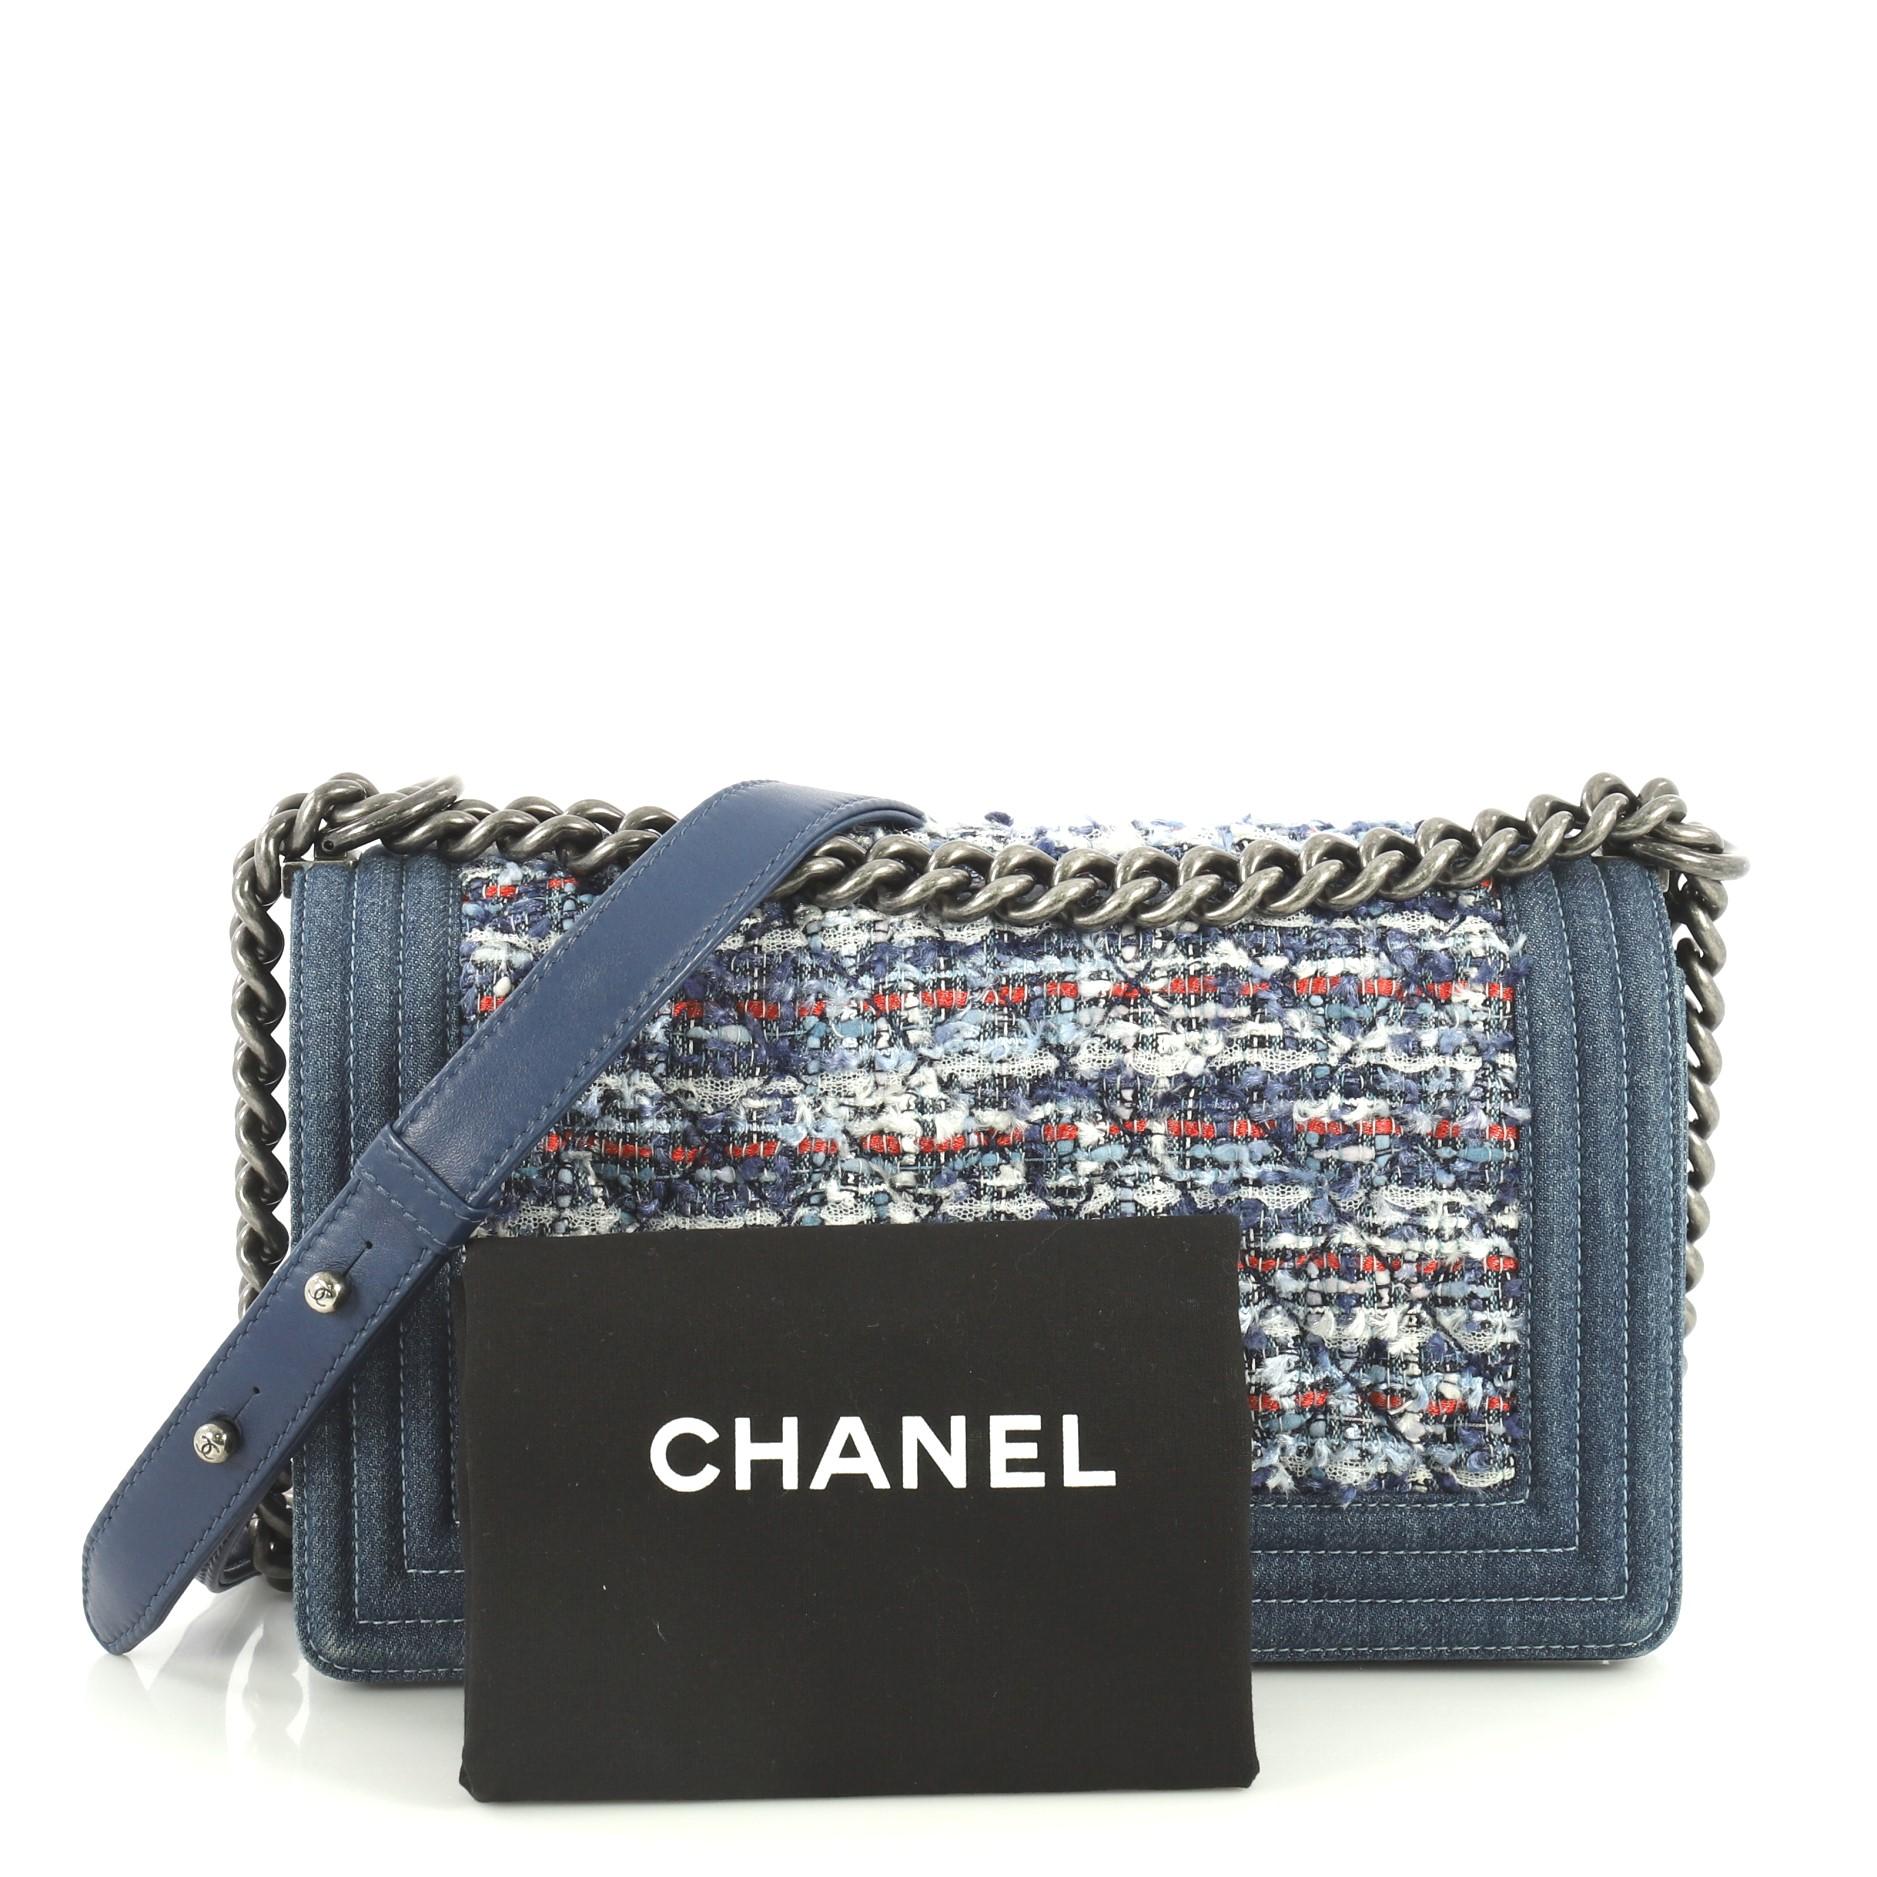 This Chanel Boy Flap Bag Braided Tweed and Lambskin with Denim Old Medium, crafted from blue braided tweed and lambskin leather, features chain link strap with shoulder pad and aged silver-tone hardware. Its CC boy push lock closure opens to a blue